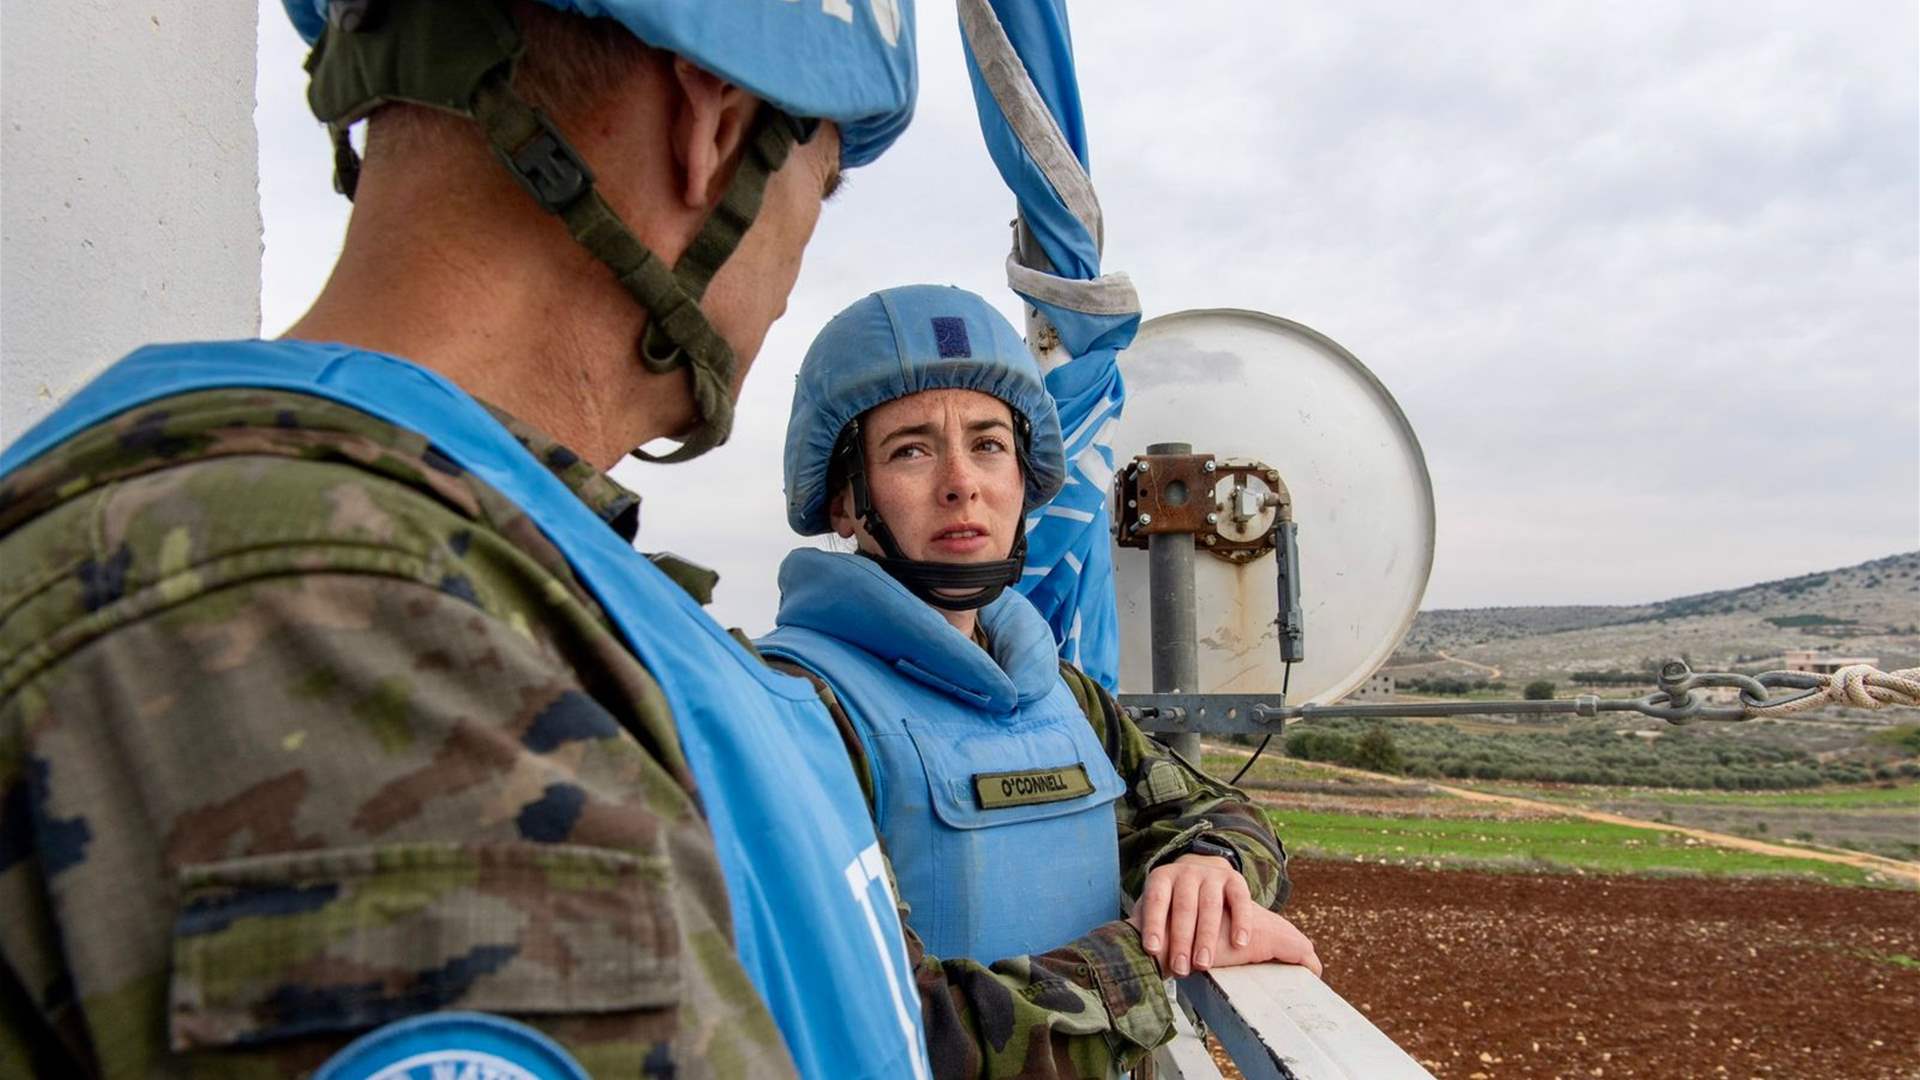 UNIFIL confirms to LBCI detainment of peacekeepers by local individuals, stressing authorized mobility across Lebanon